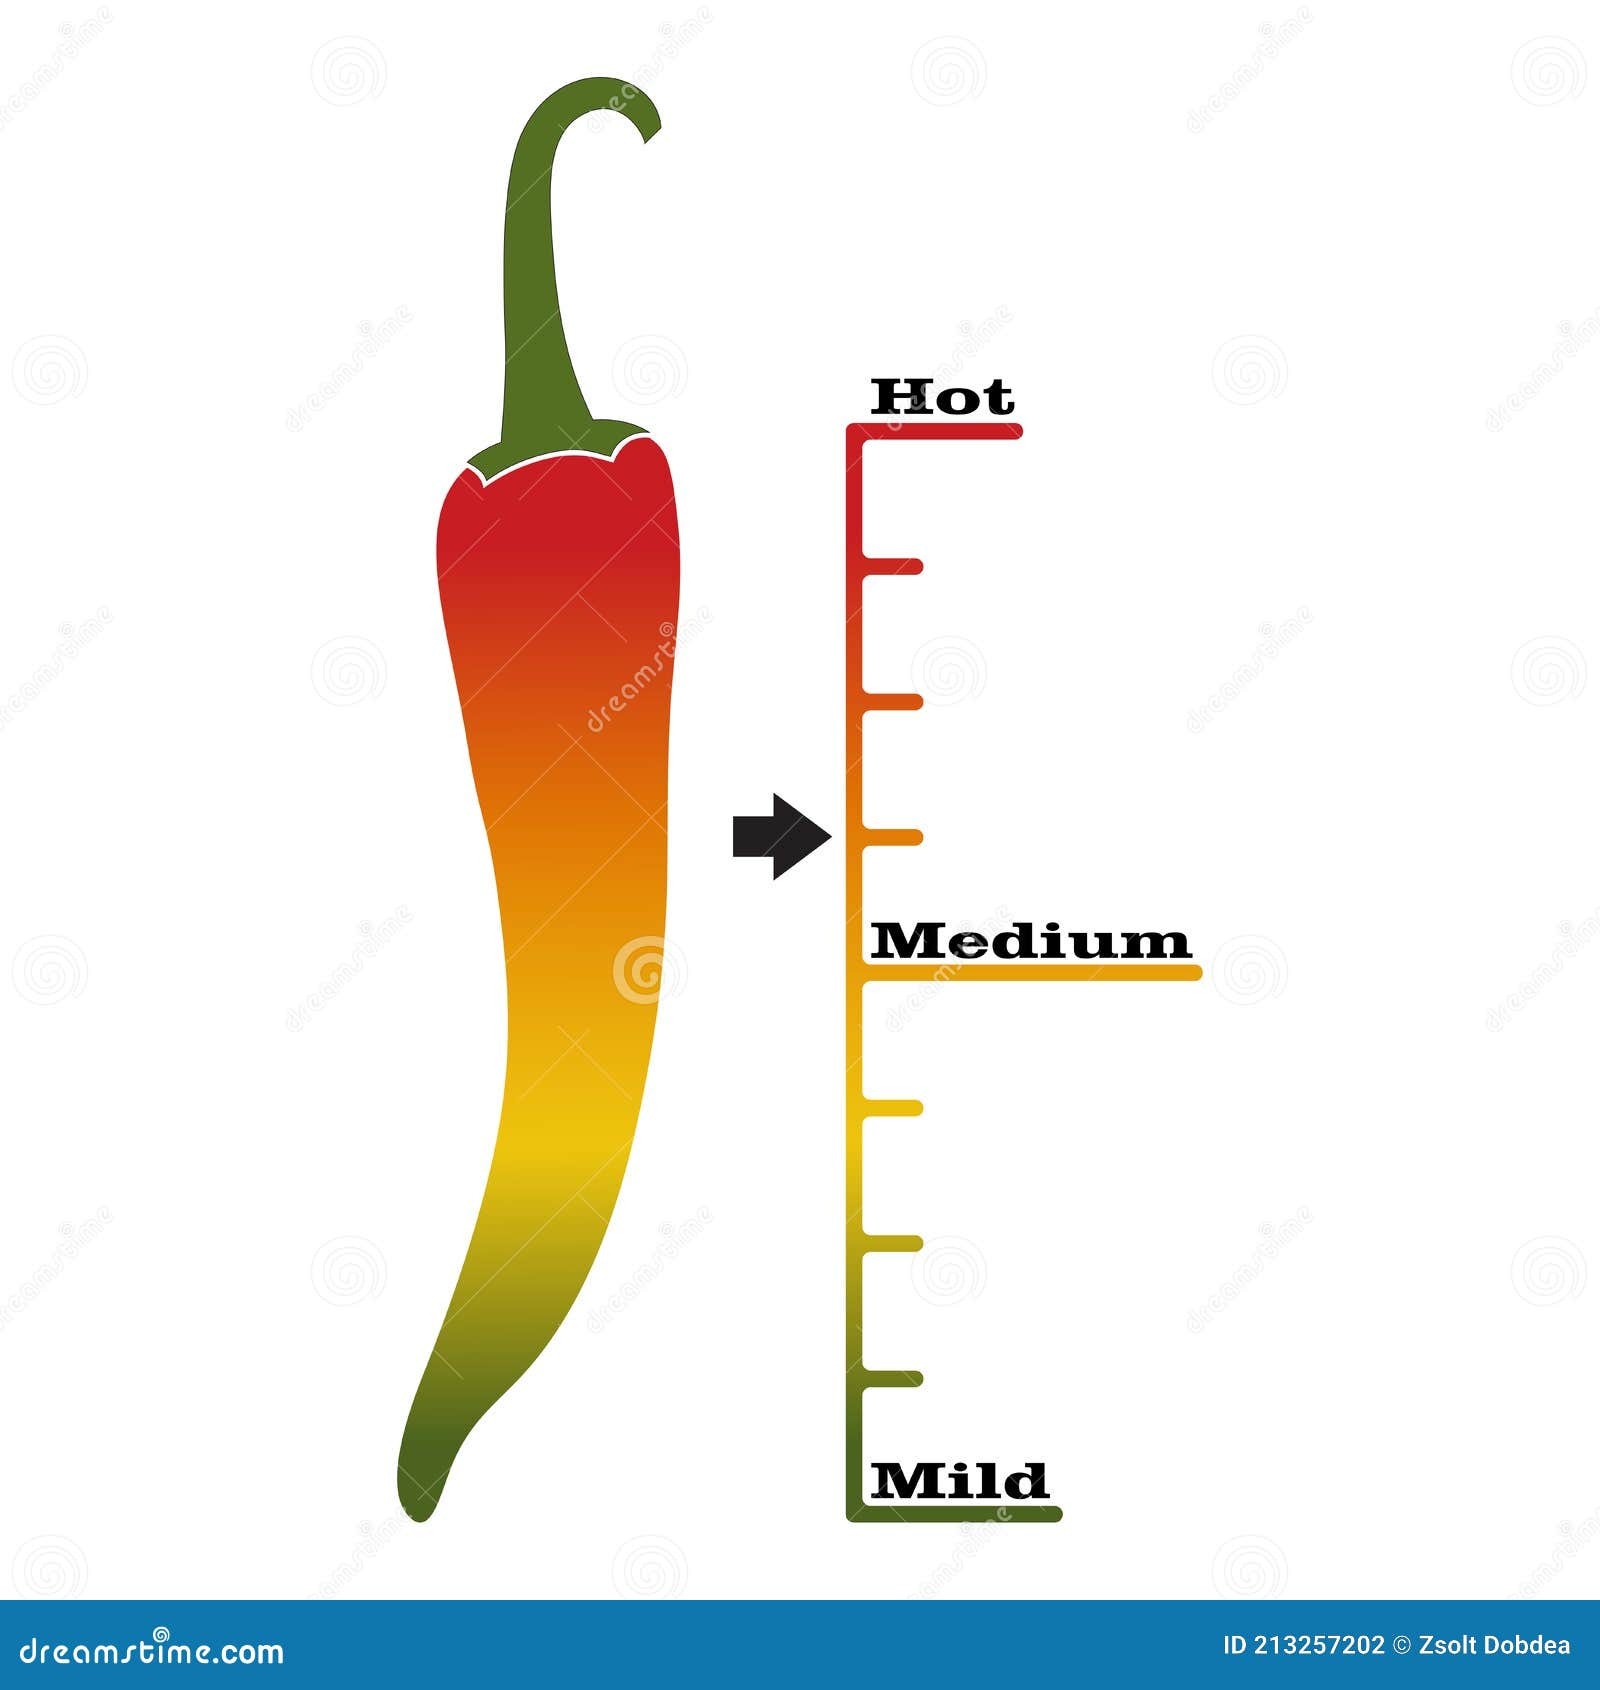 scoville heat scale  , suitable for informational label of hot sauces or hot foods